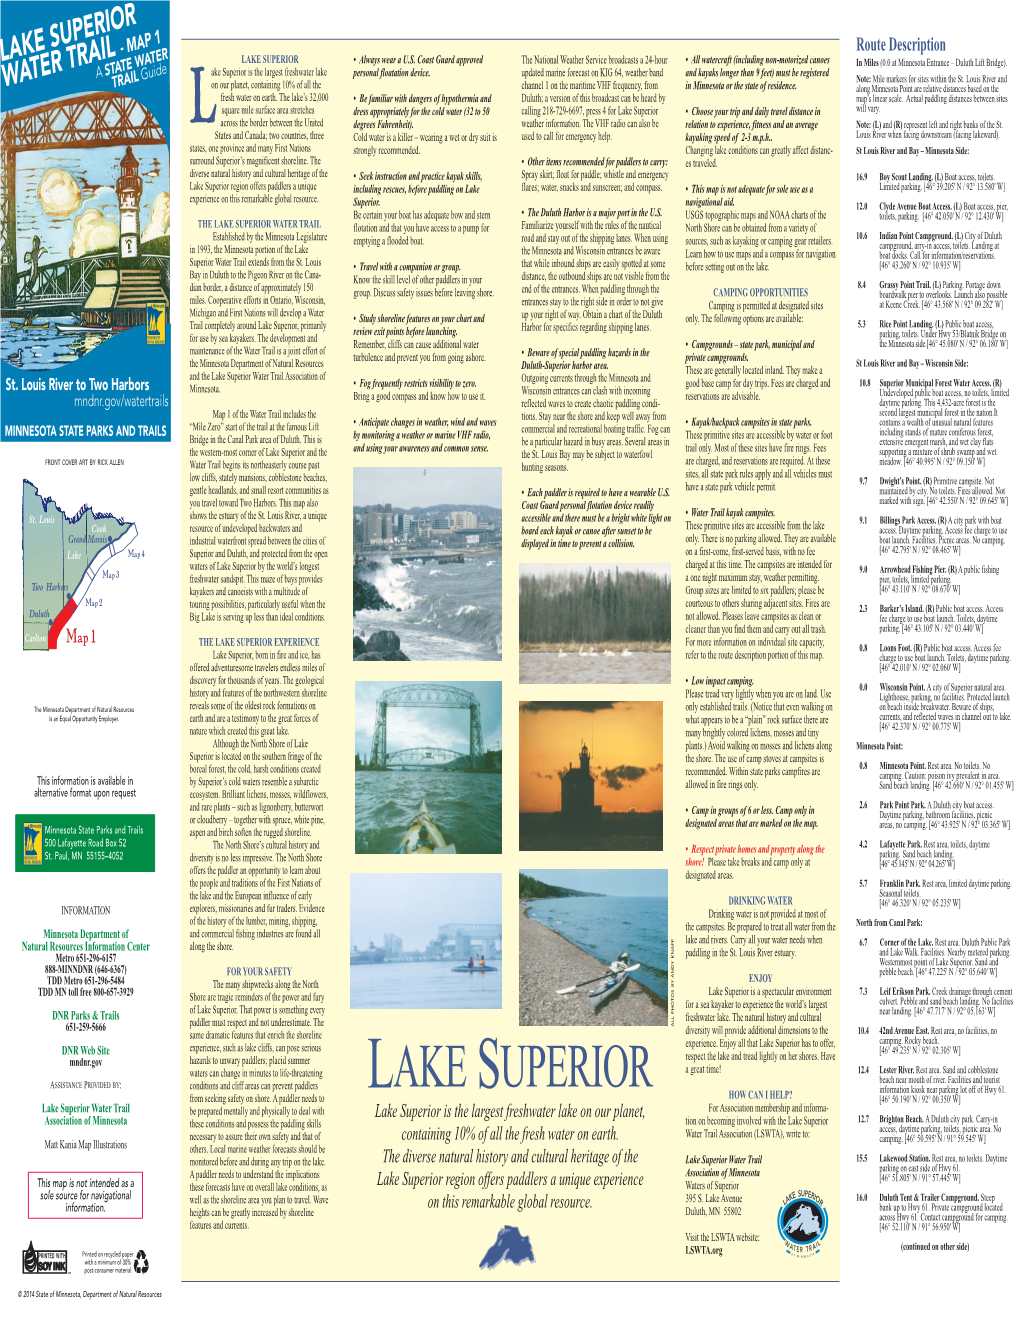 Lake Superior Water Trail Map 1 from St. Louis River to Two Harbors